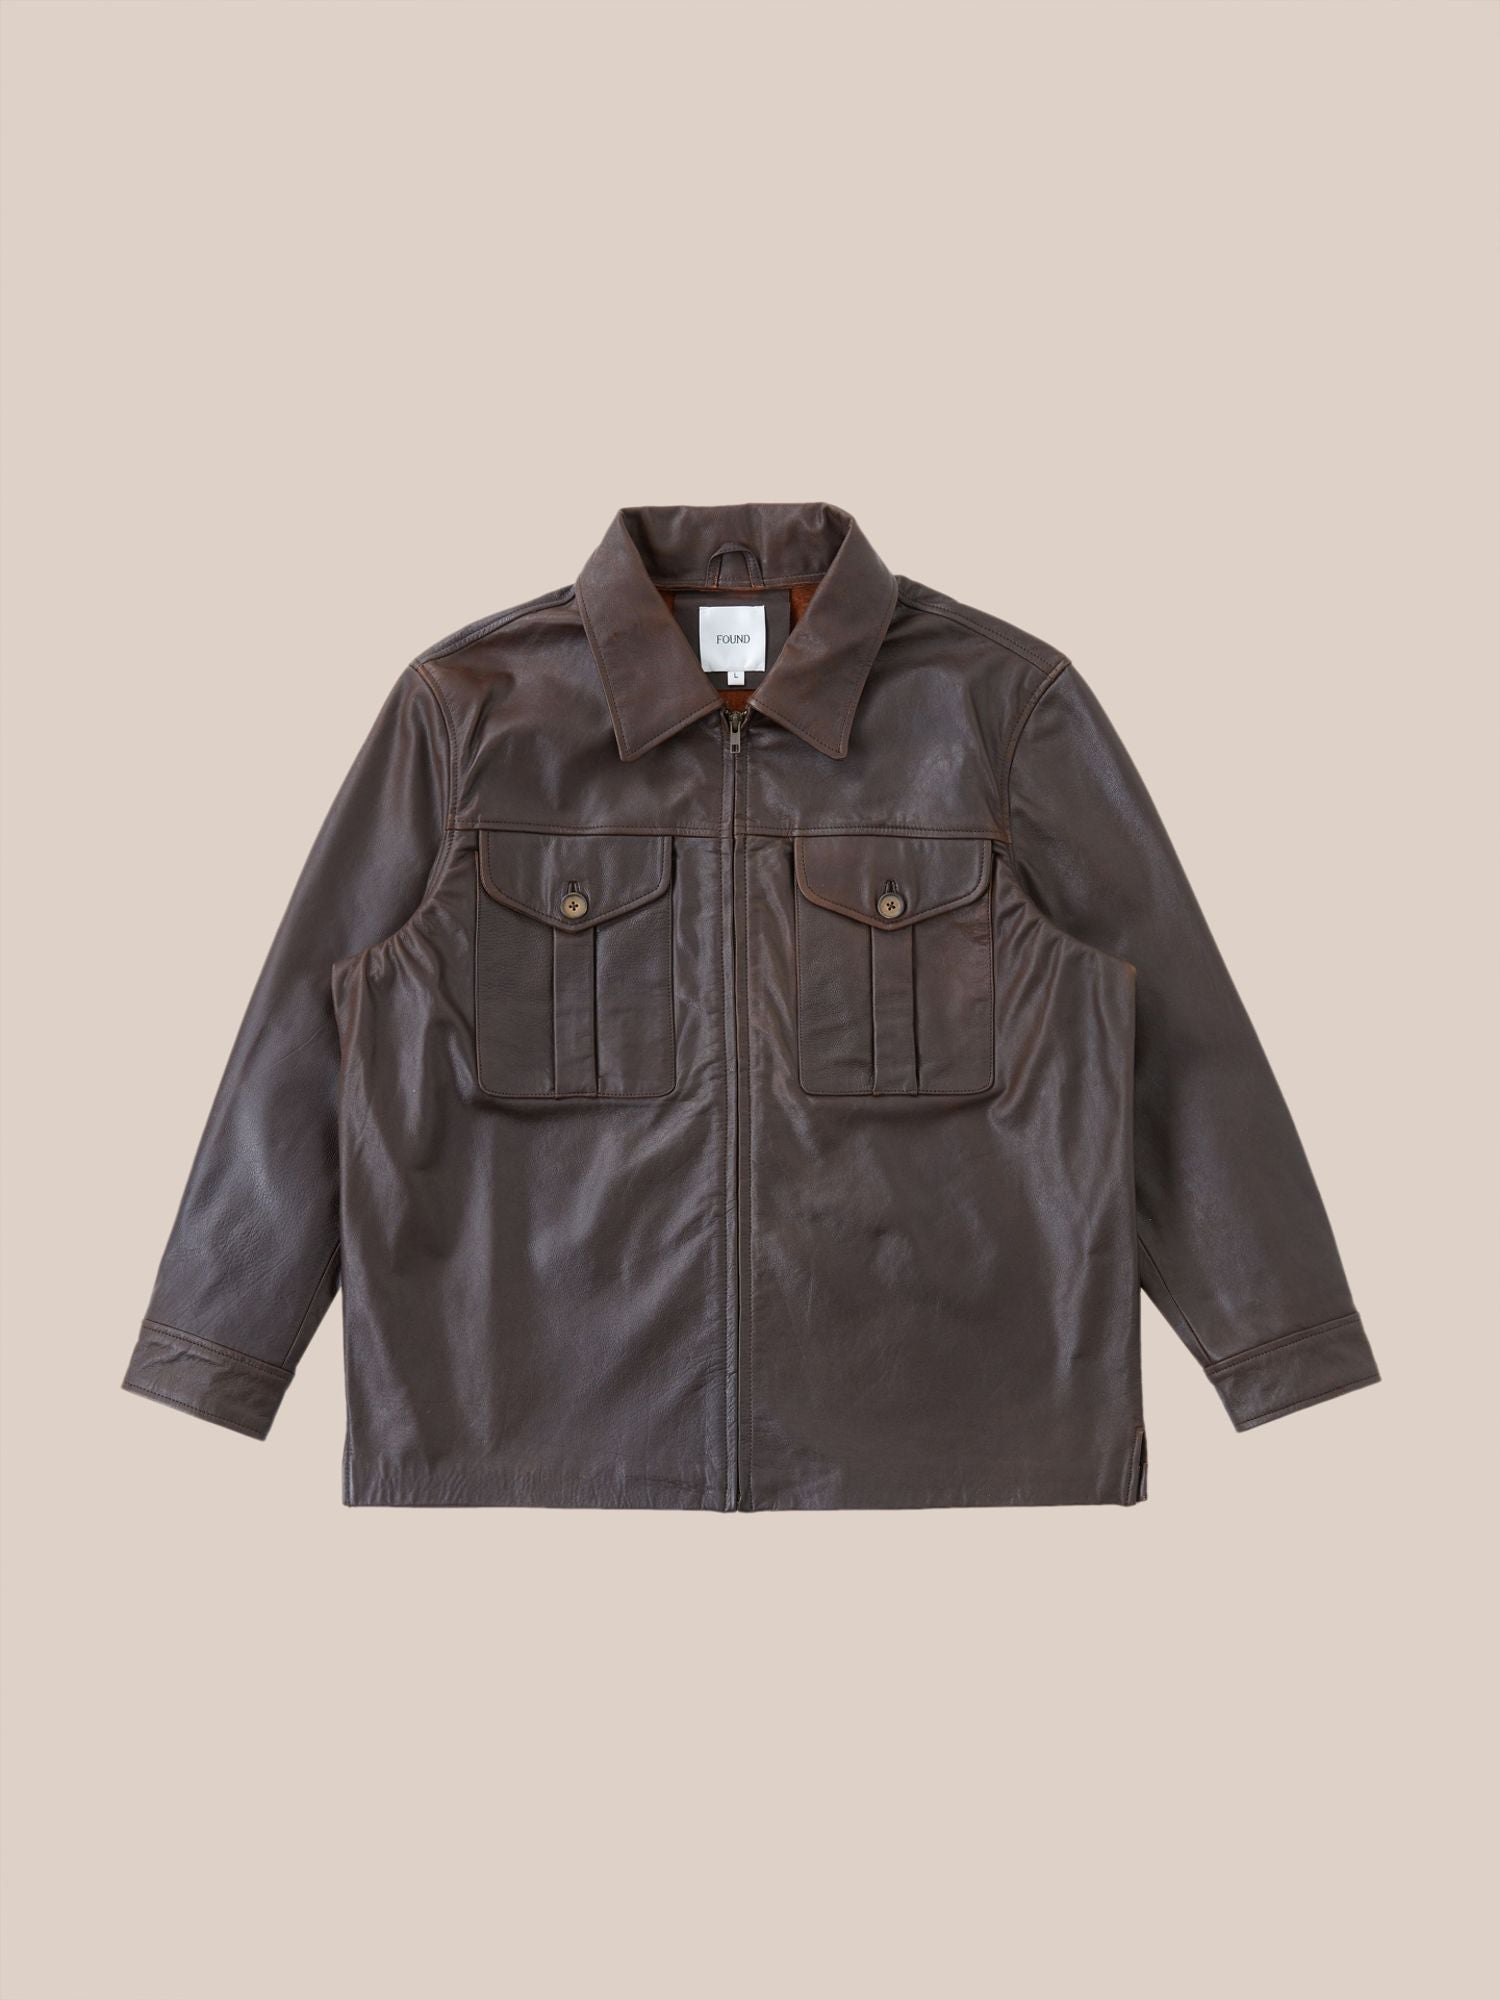 Sepia Leather Overshirt by Found, with a collared neckline and two chest pockets displayed against a pale pink background.